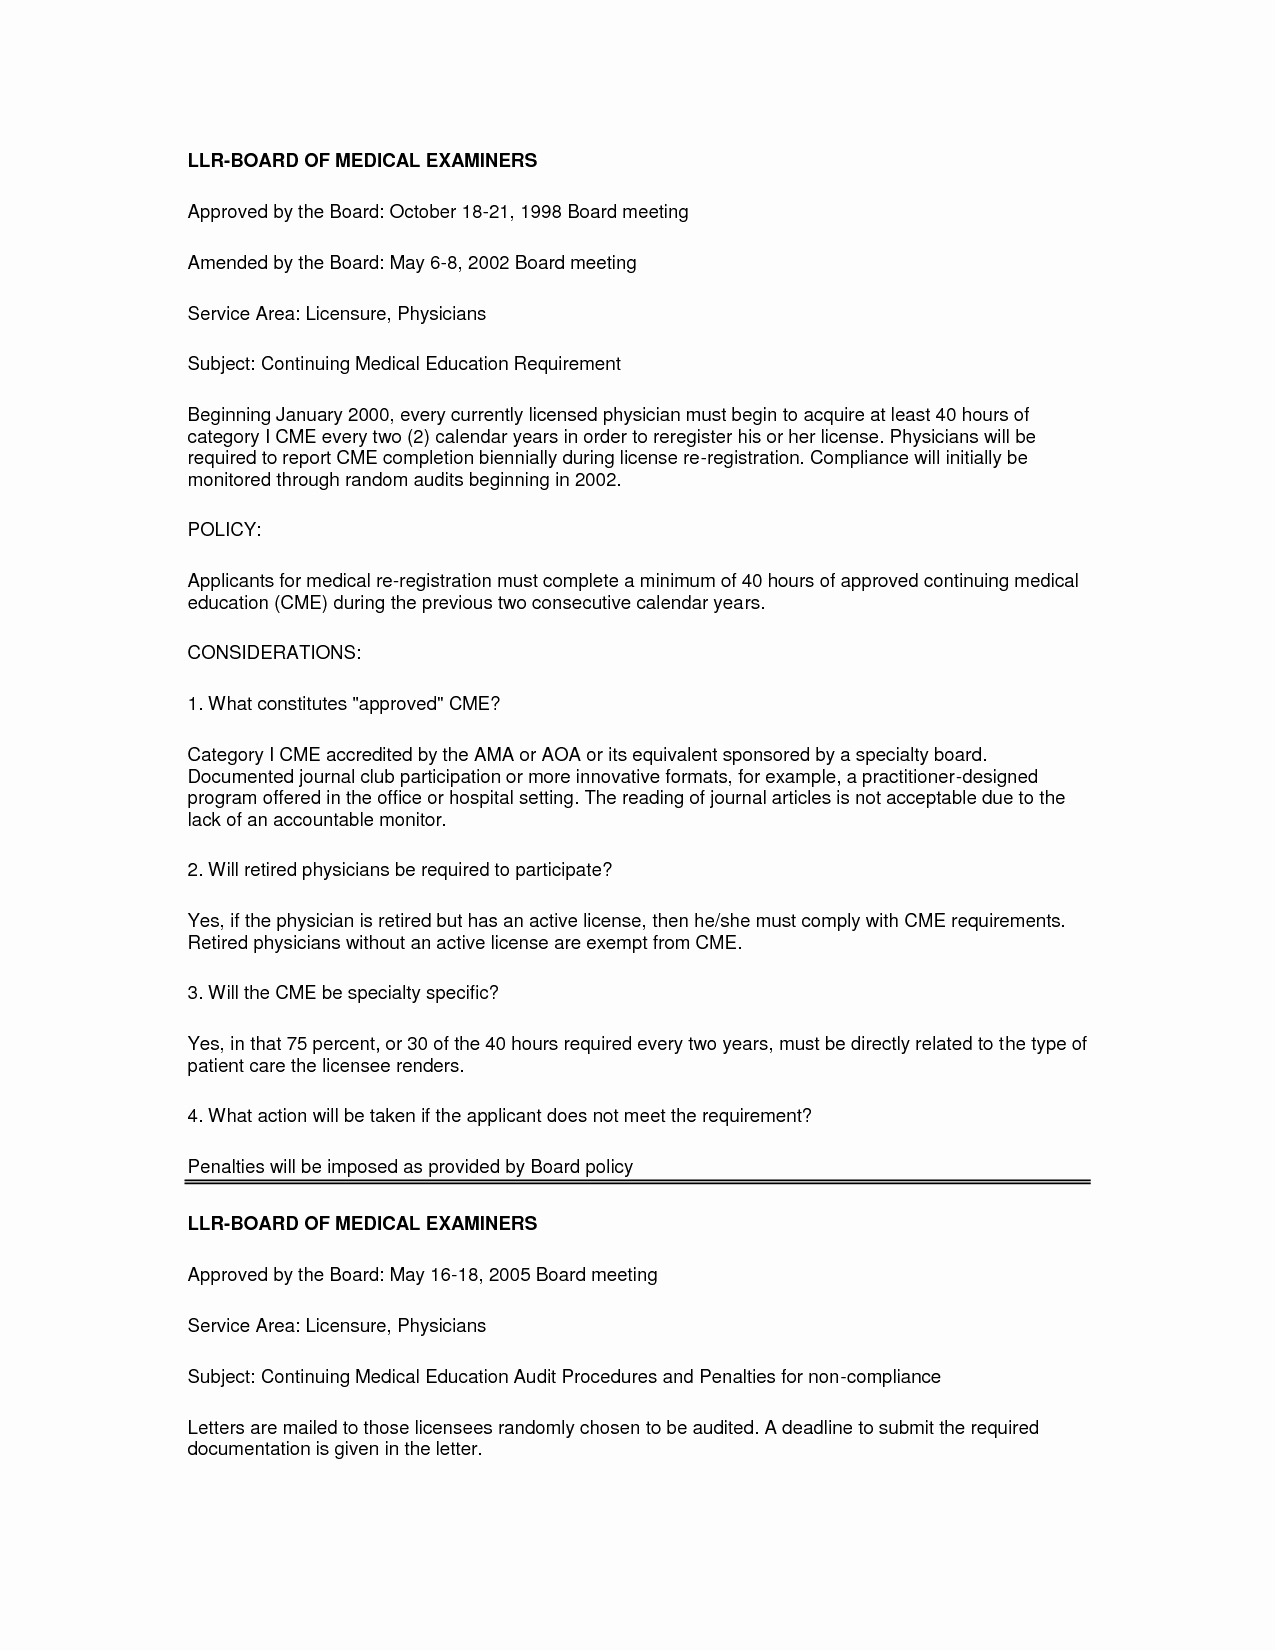 Cease and Desist order Template Awesome Cease and Desist Template